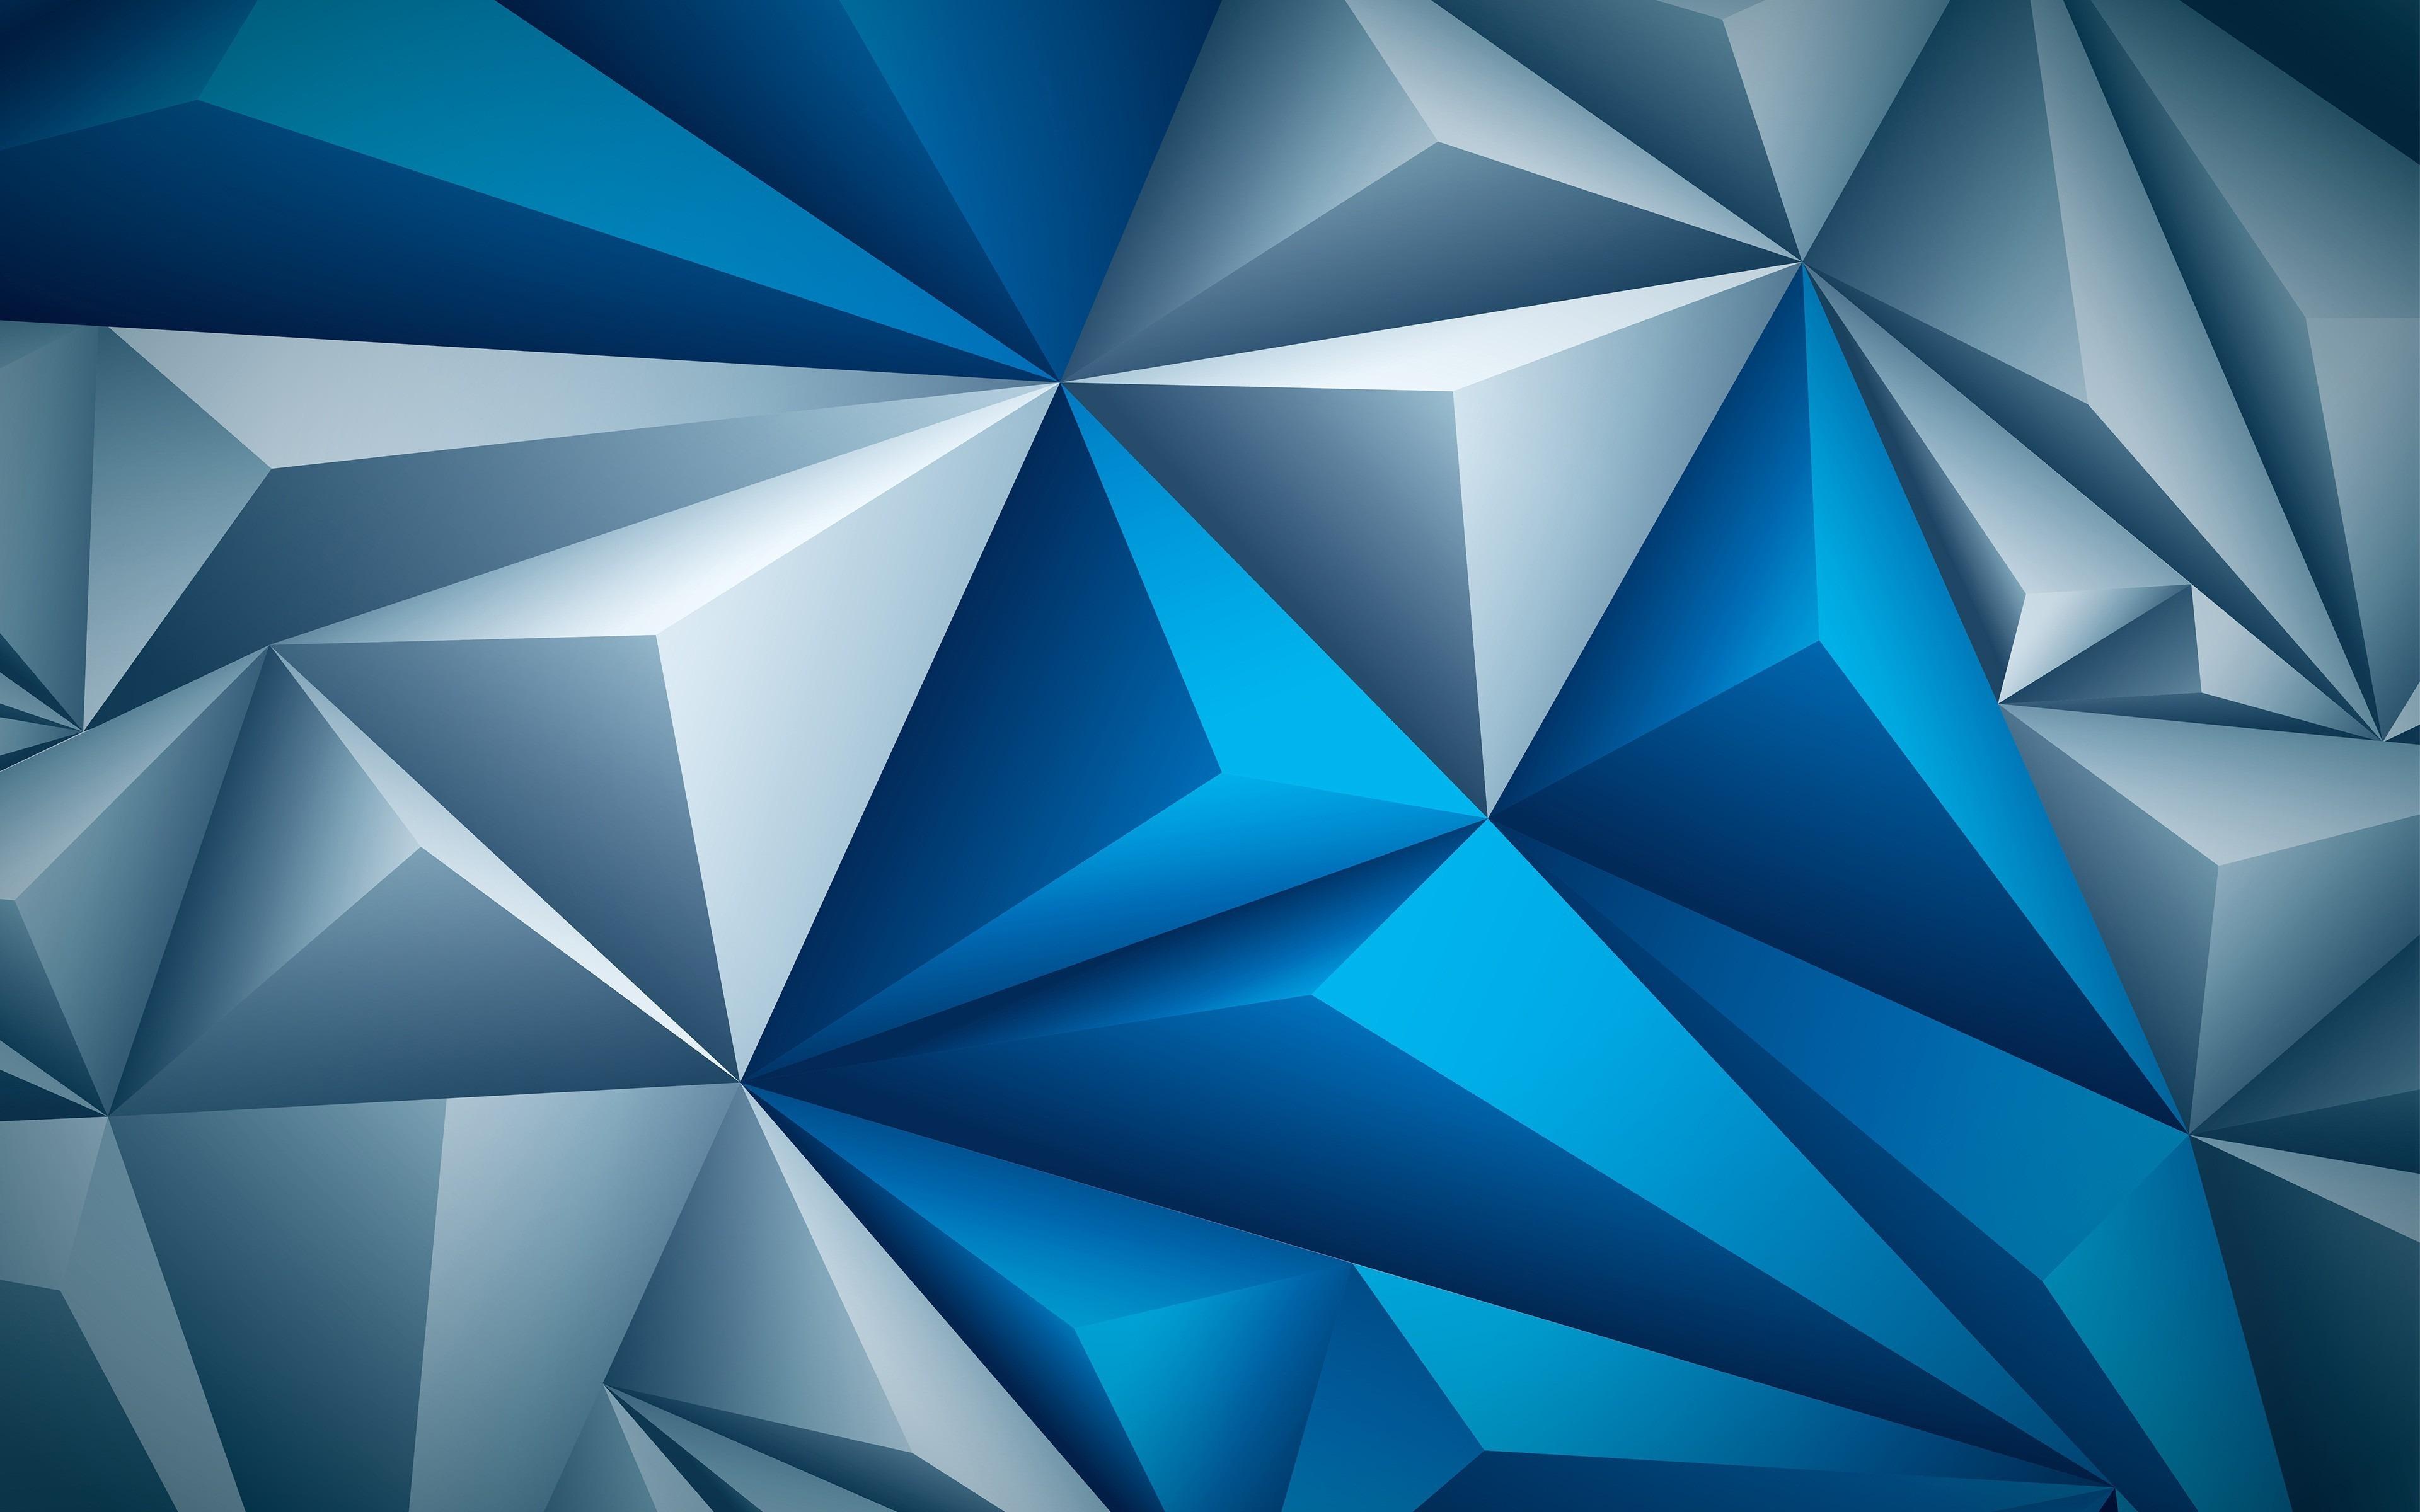 Download 3840x2400 Wallpaper Abstract, Low Poly, Geometrical Shapes